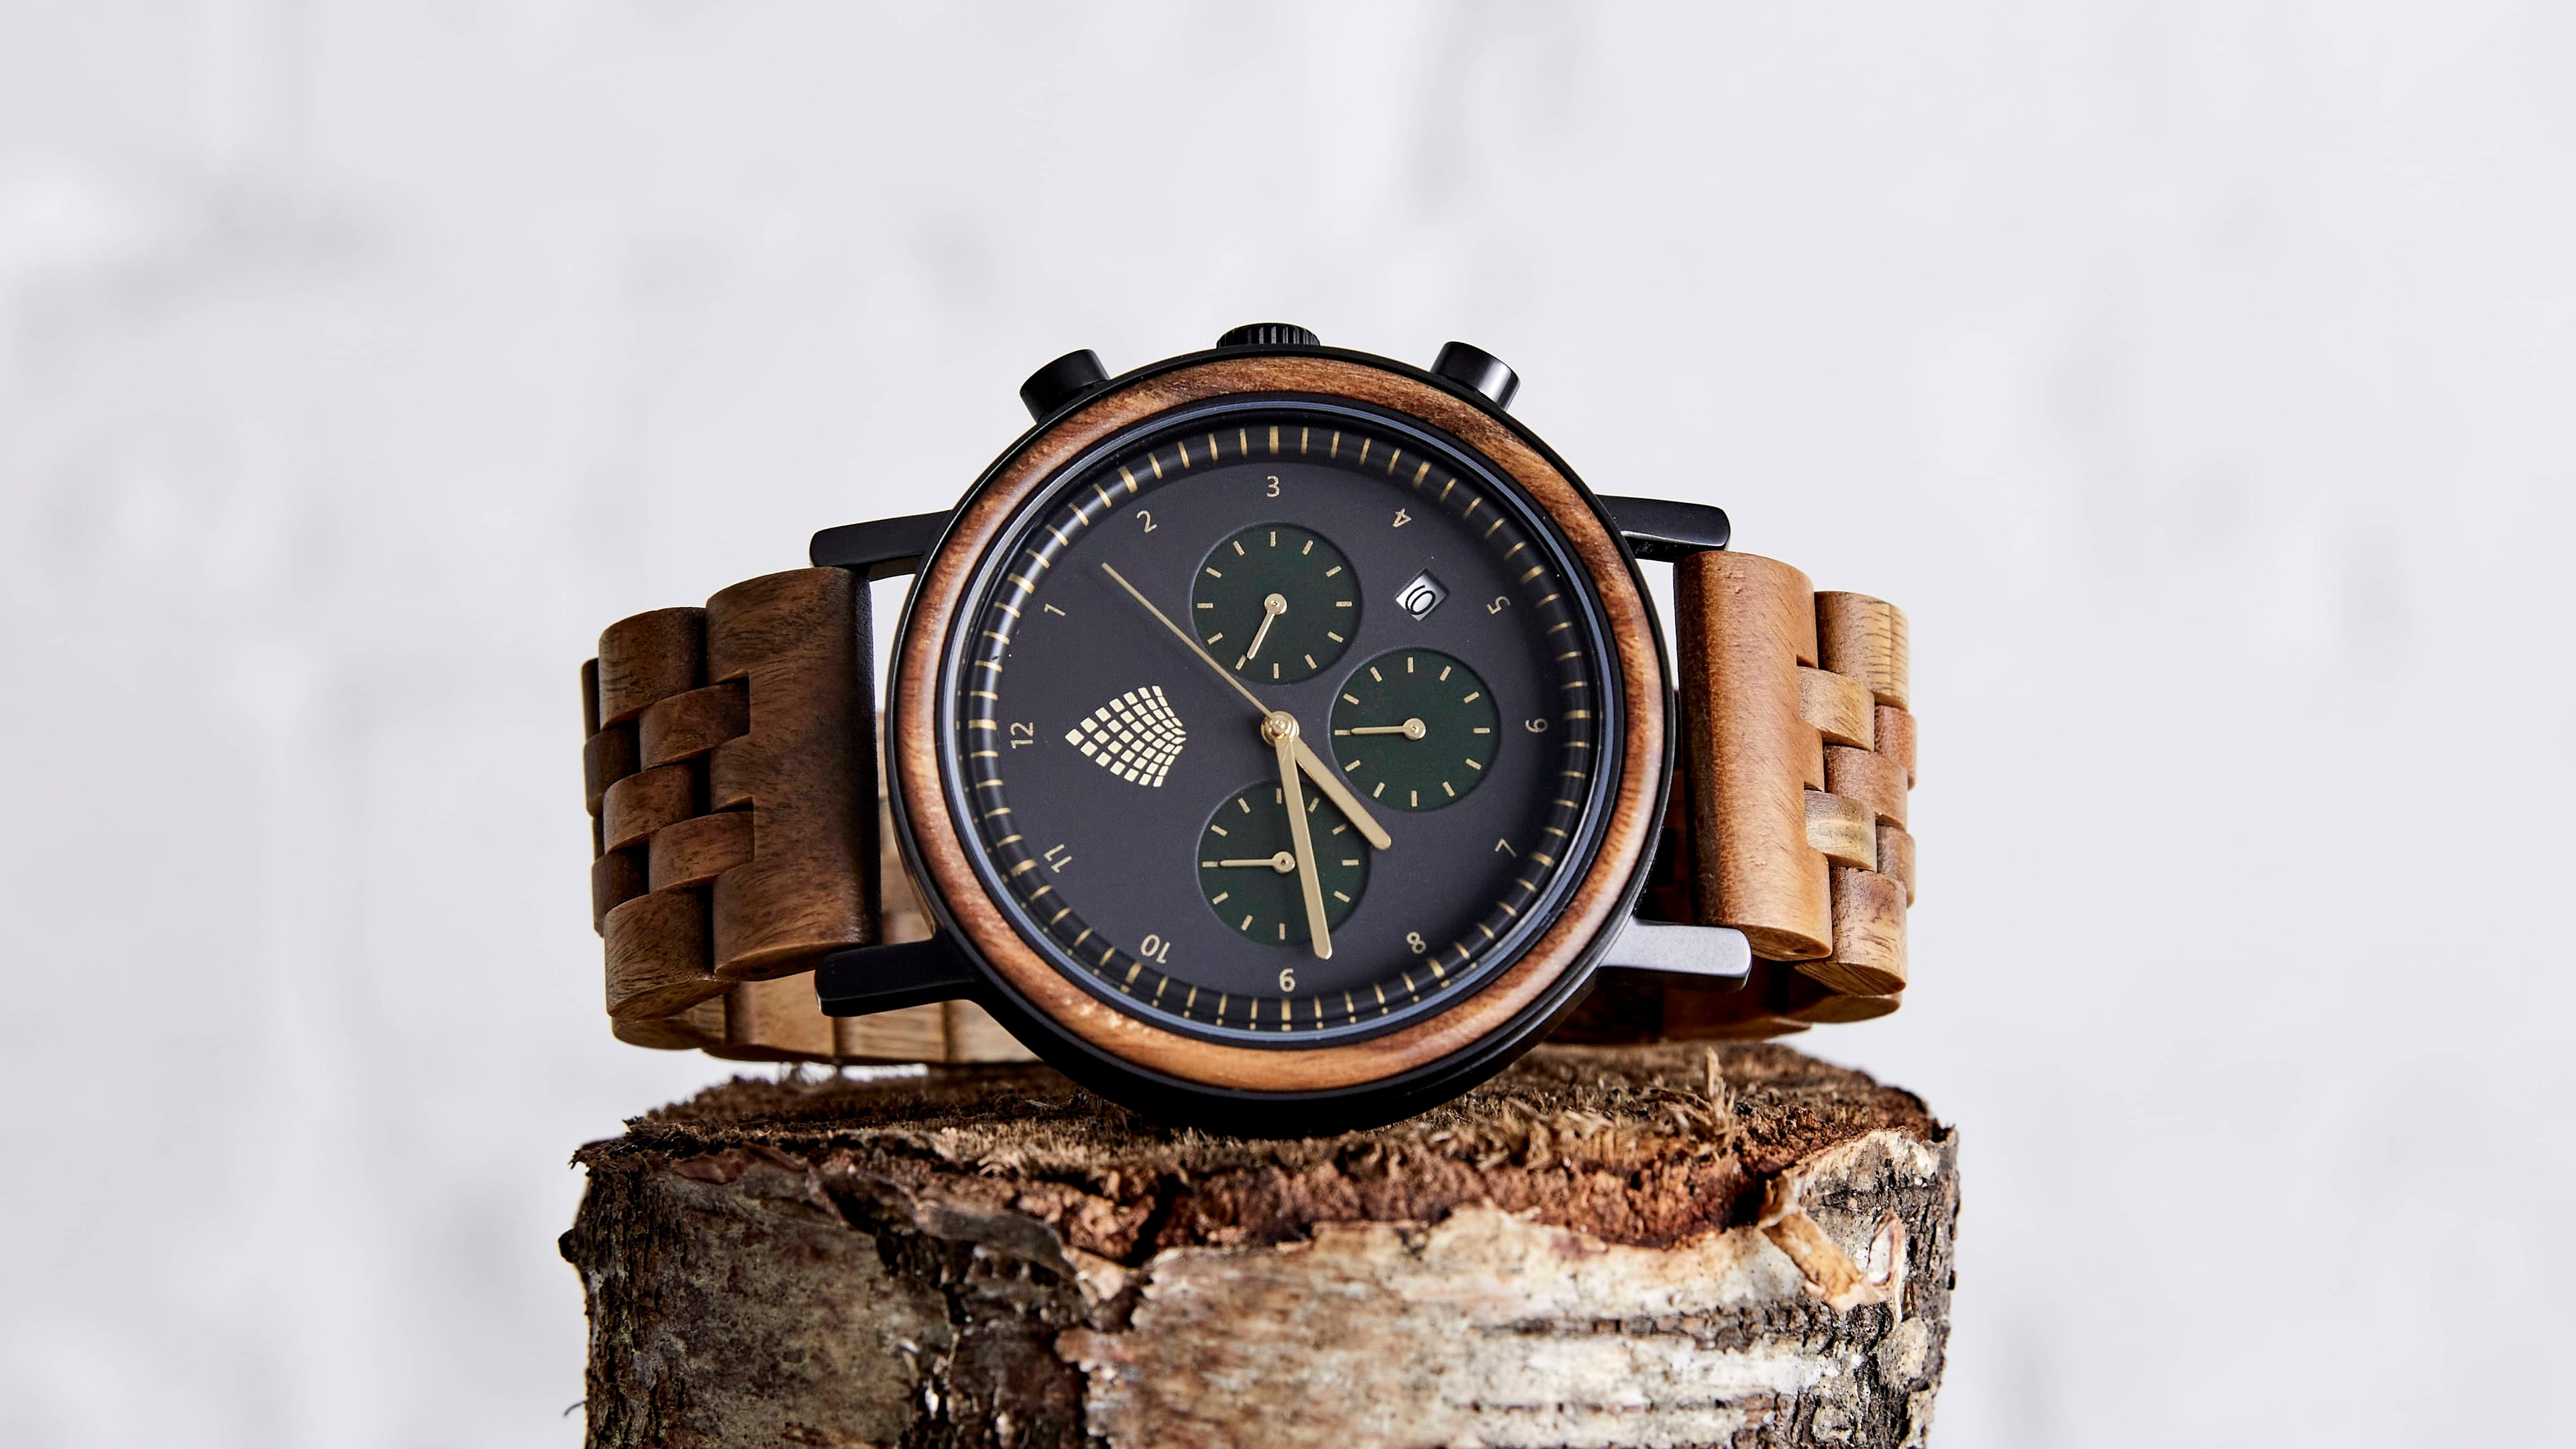 The Cedar sustainable watch - handmade from recycled wood by The Sustainable Watch Company - Chronograph watch